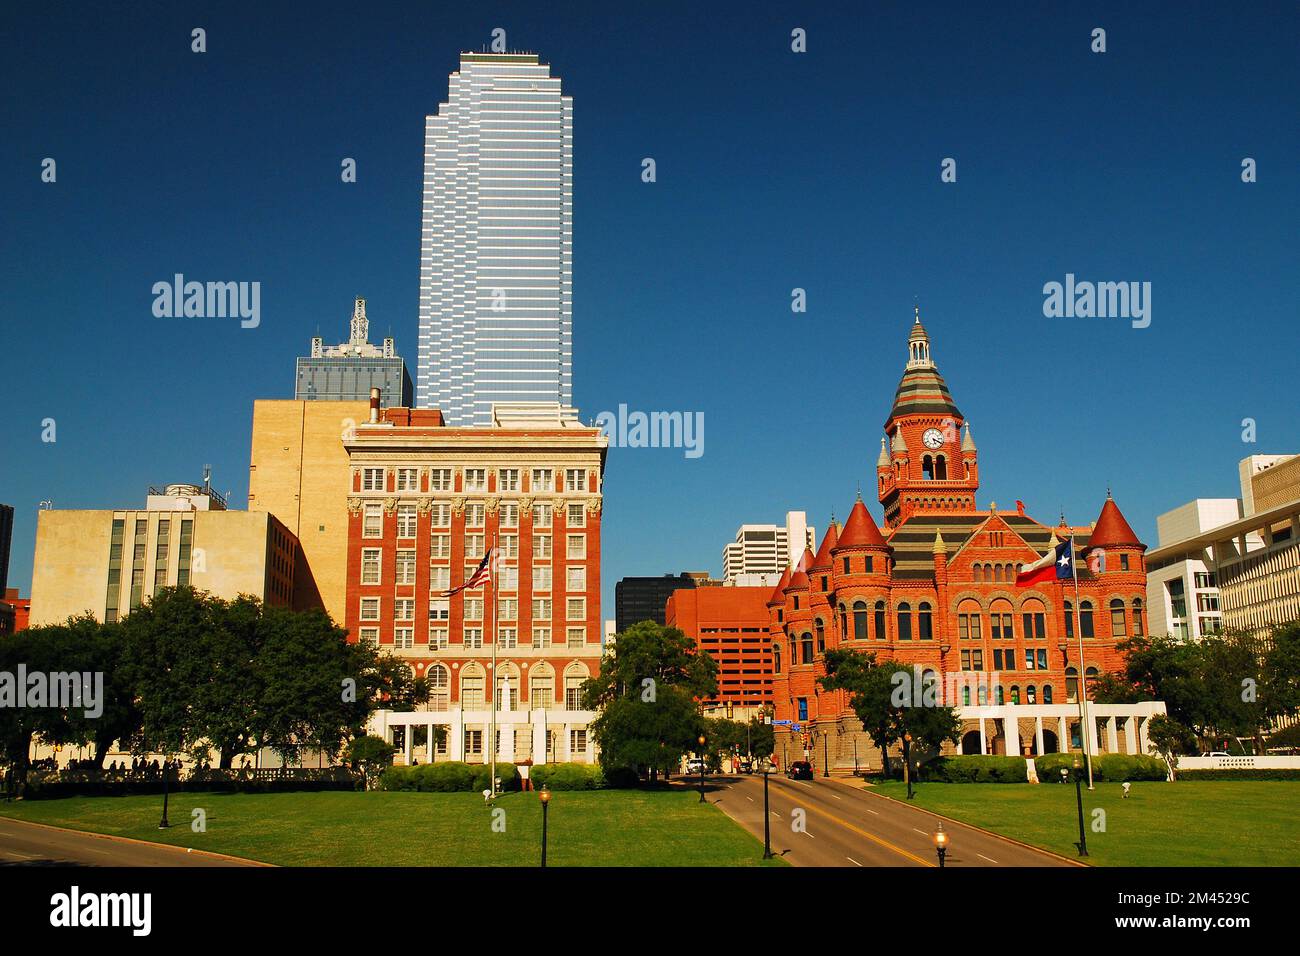 The Bank of America Building and the Old Red Courthouse dominate the skyline around Dealey Plaza in Dallas Texas Stock Photo